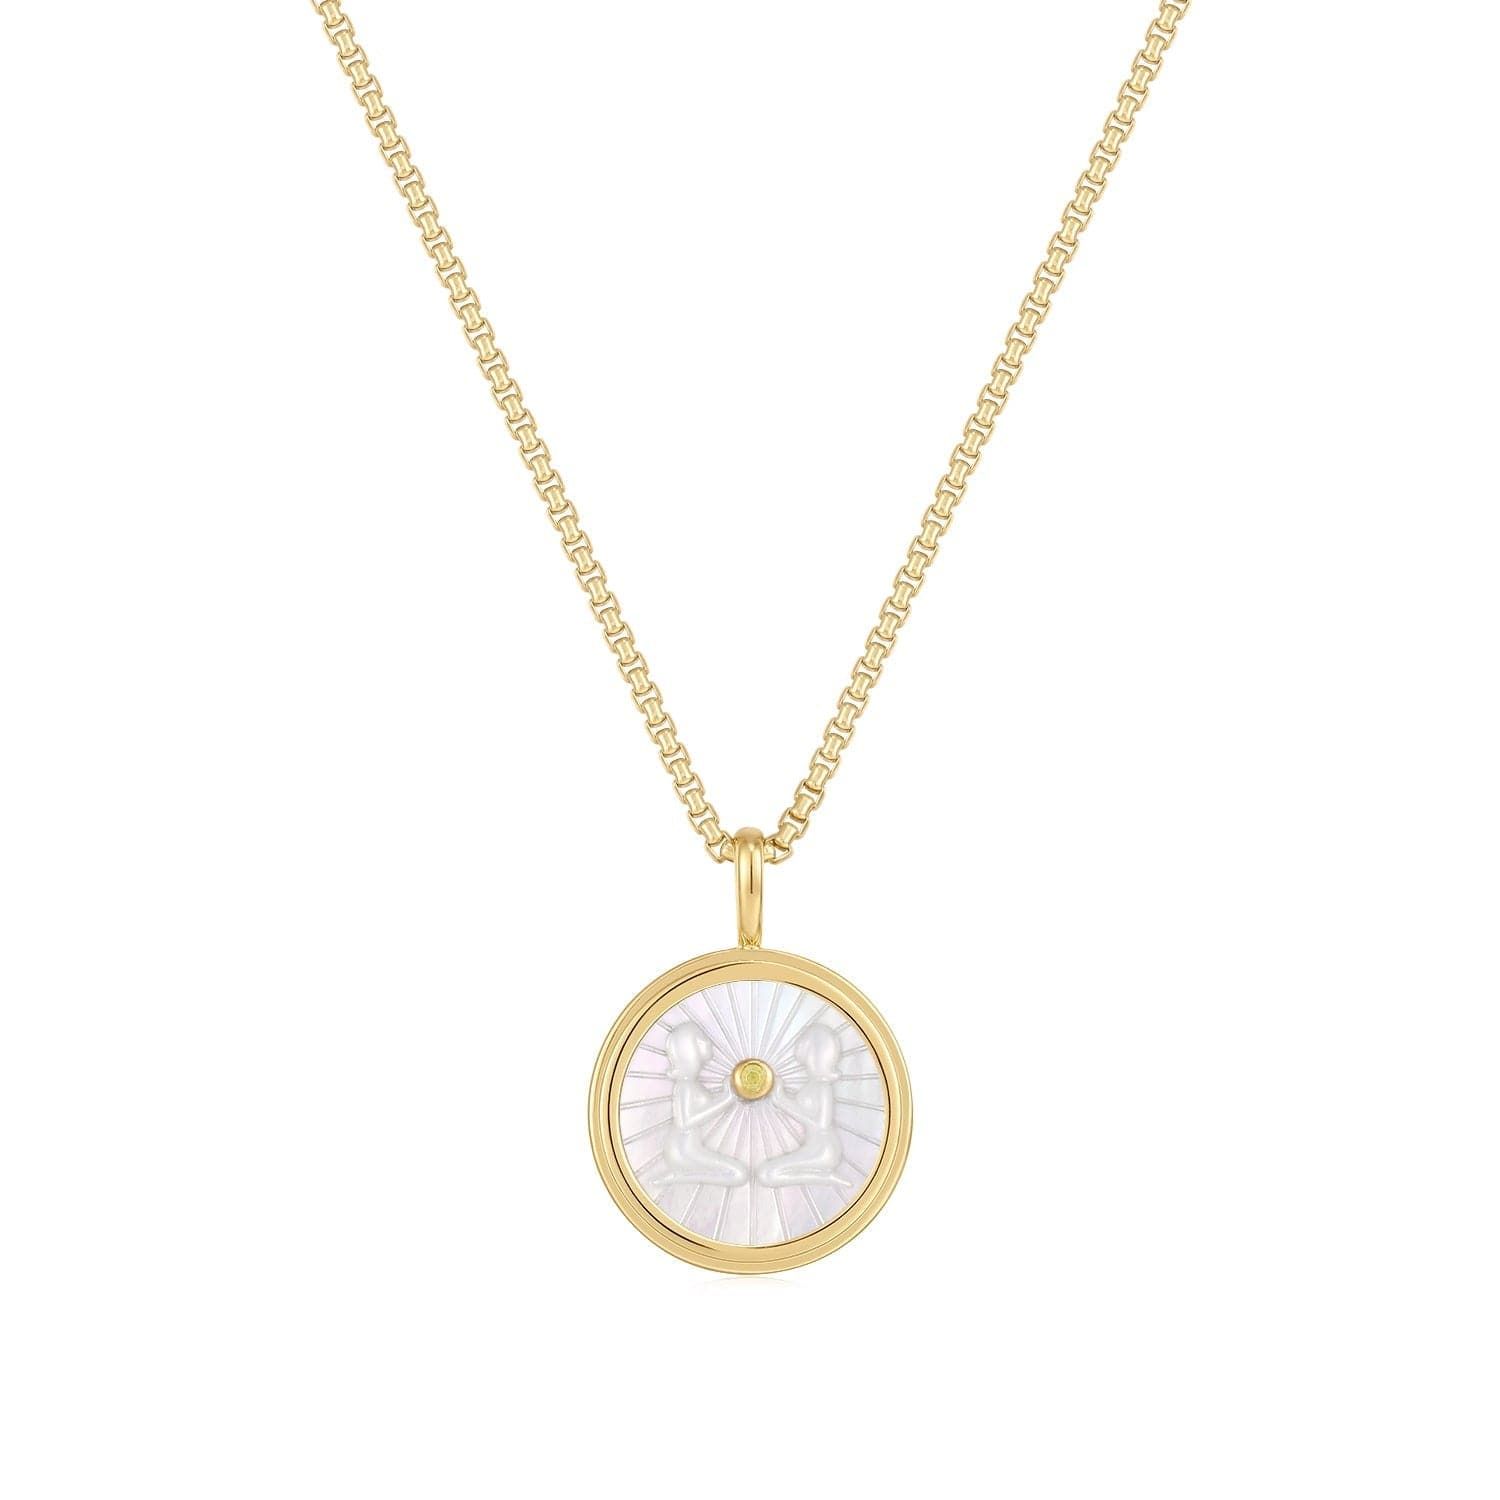 a gold necklace with a mother of pearl in the center